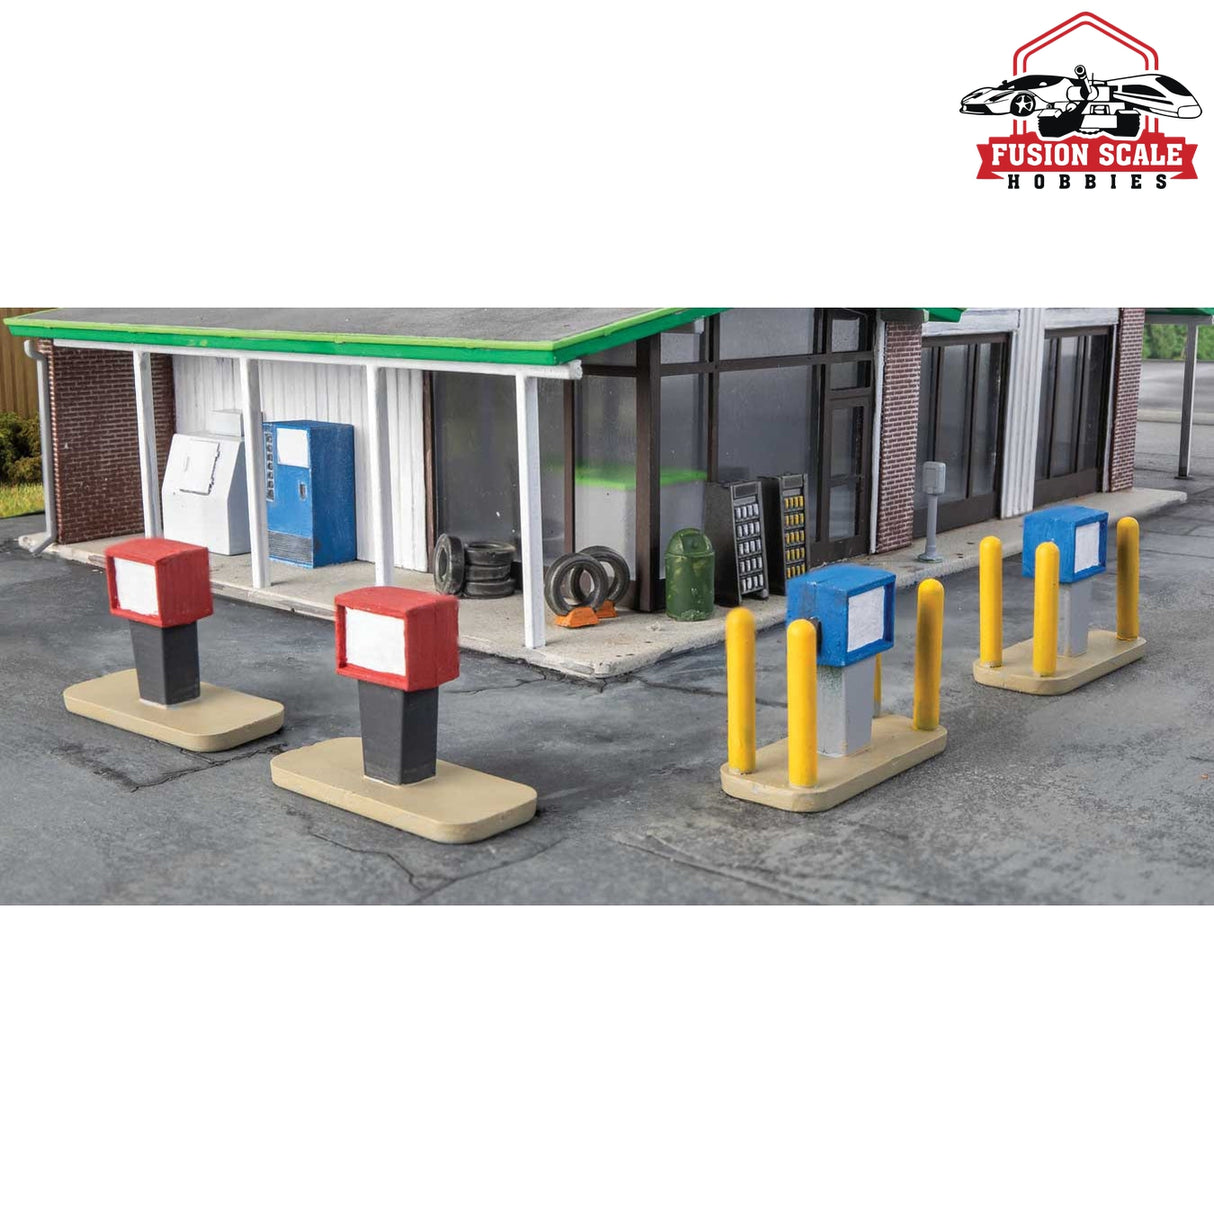 Walthers Cornerstone HO Scale Gas Station Details Kit